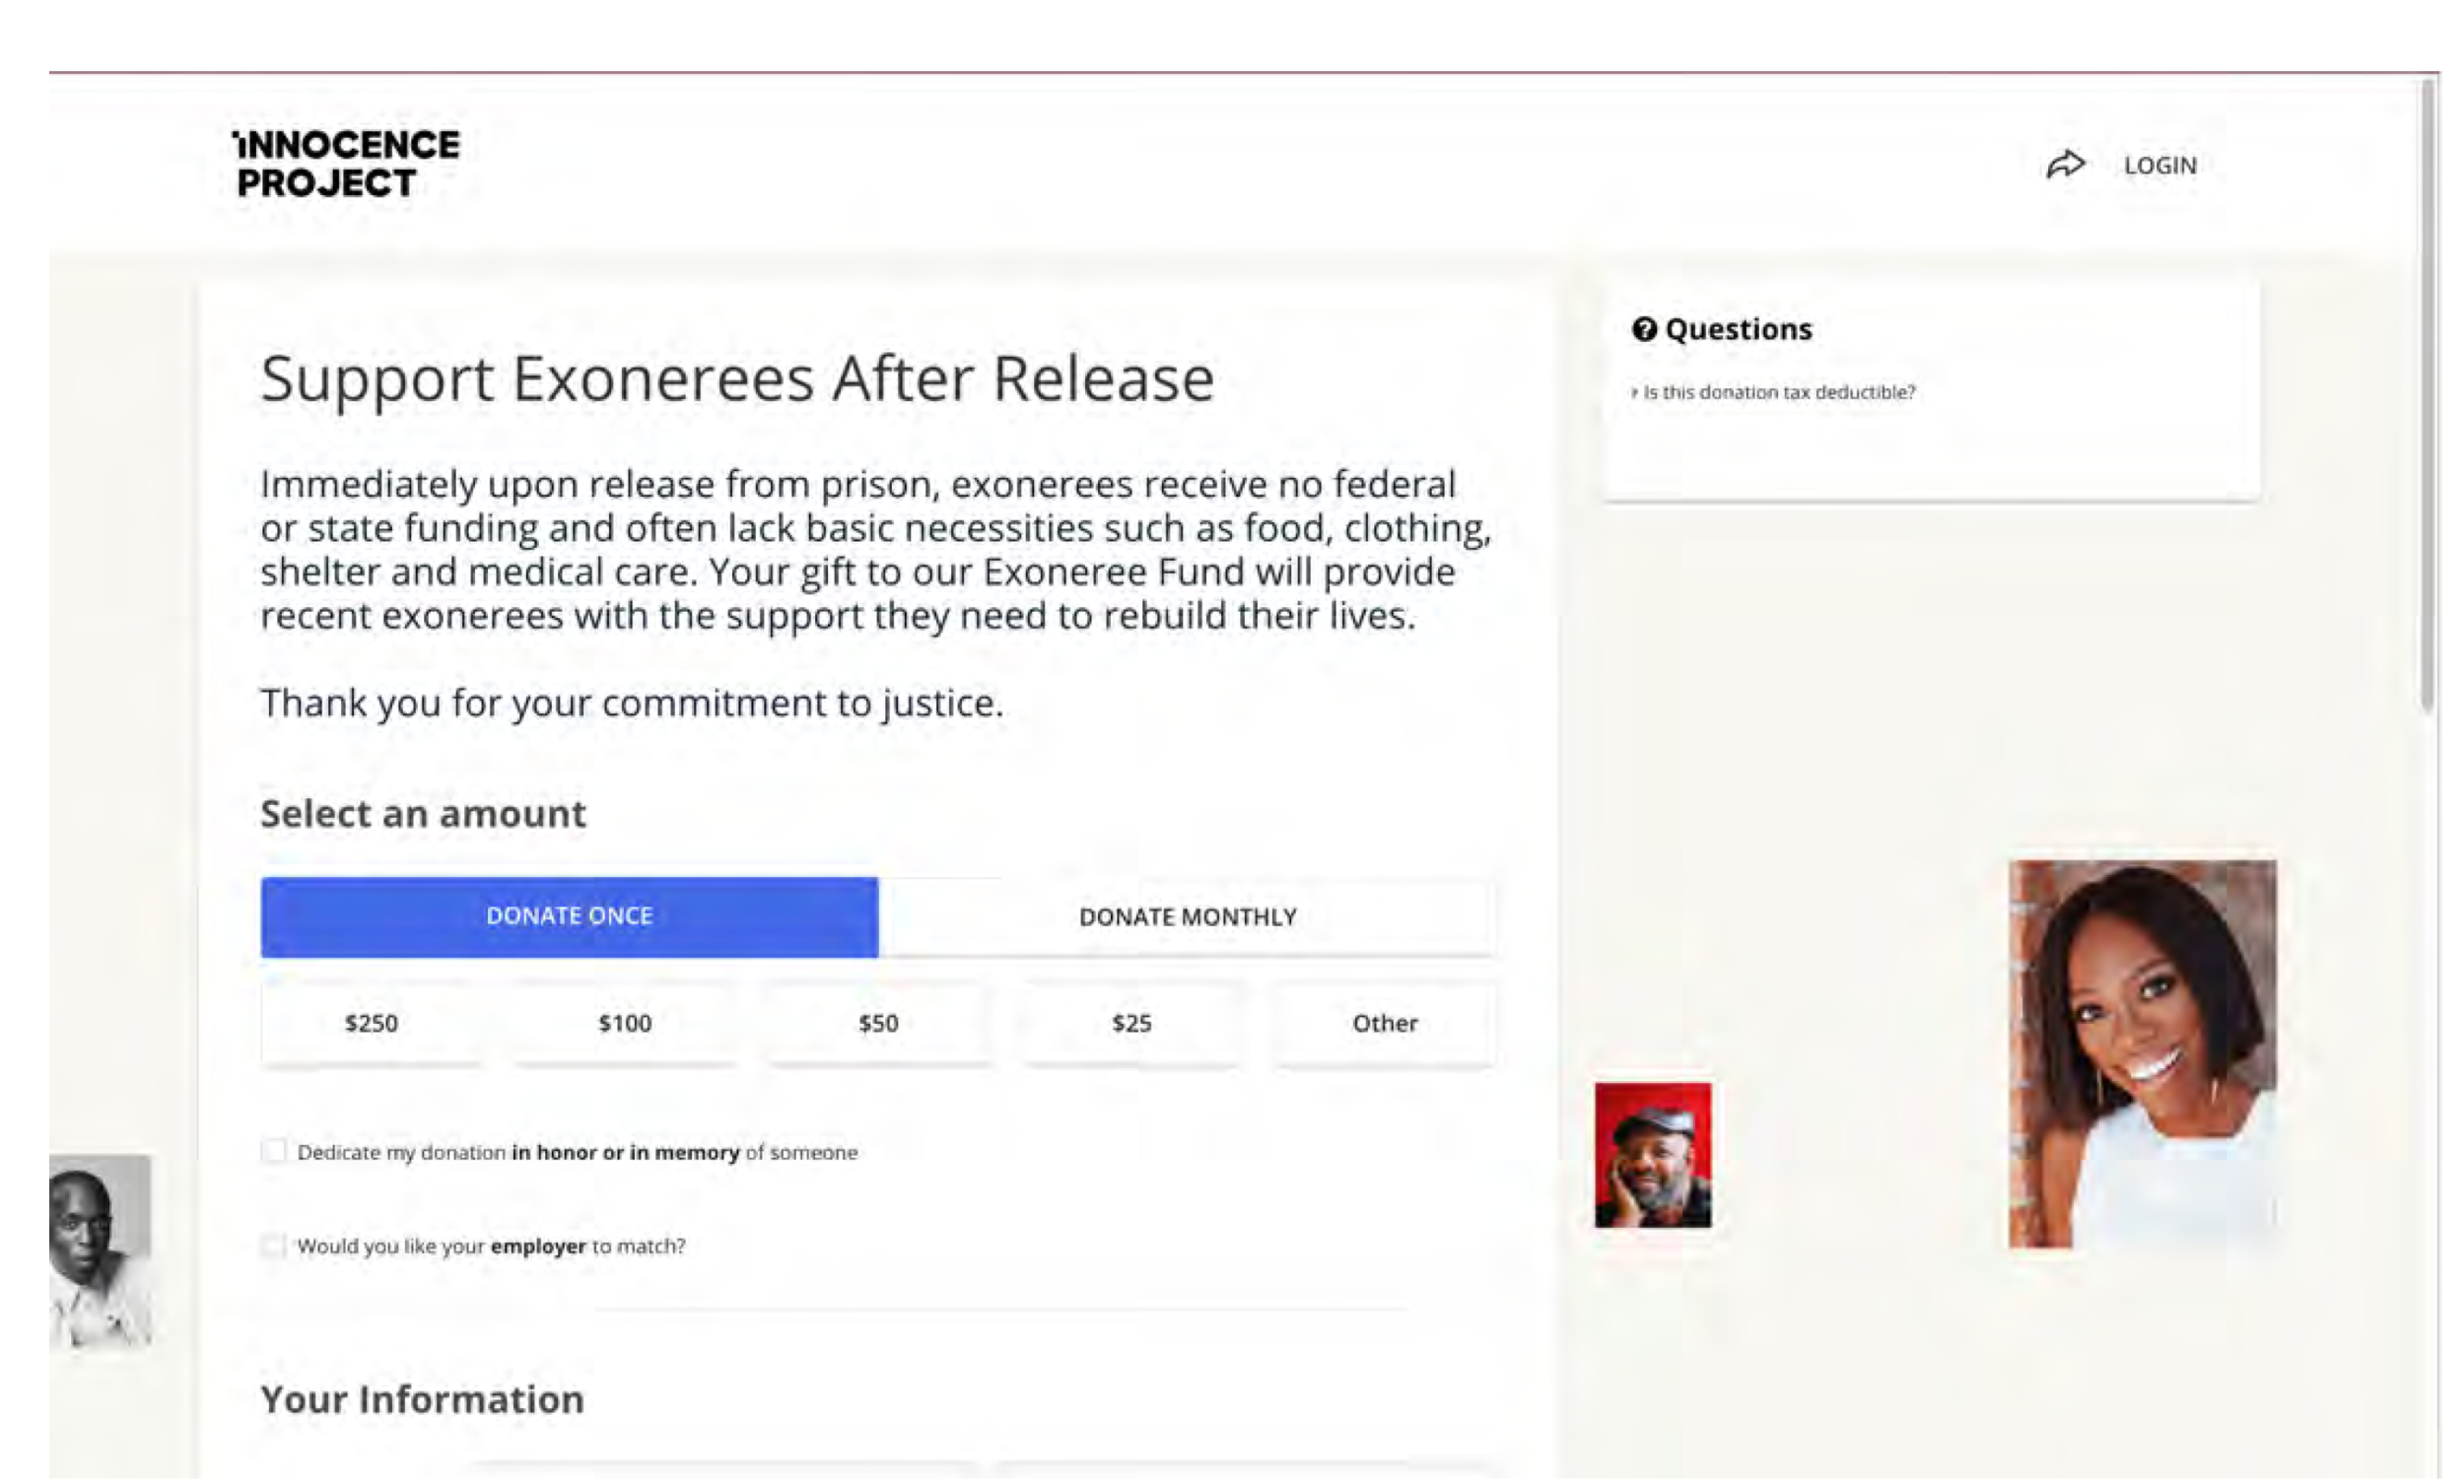 Figure 2. The Innocence Project Support Exonerees After Release page on a web browser